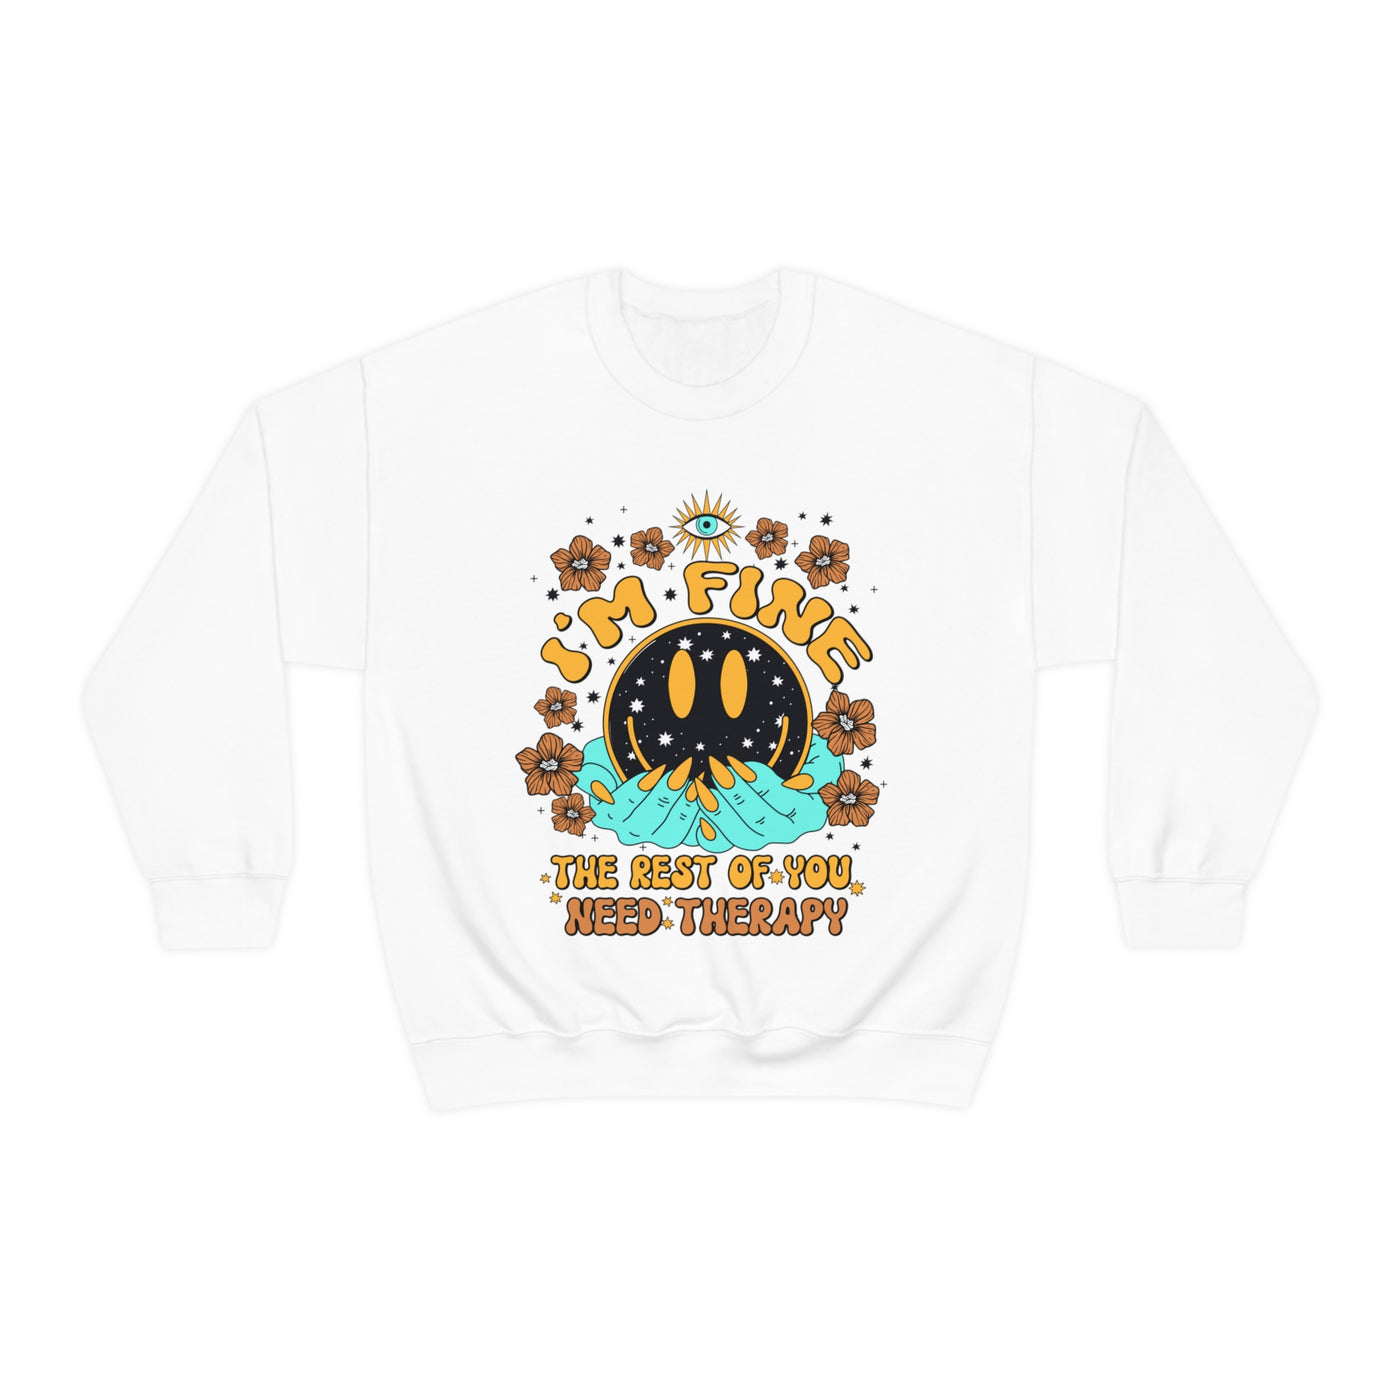 I'm Fine The Rest Of You Need Therapy | Funny Crewneck Sweatshirt